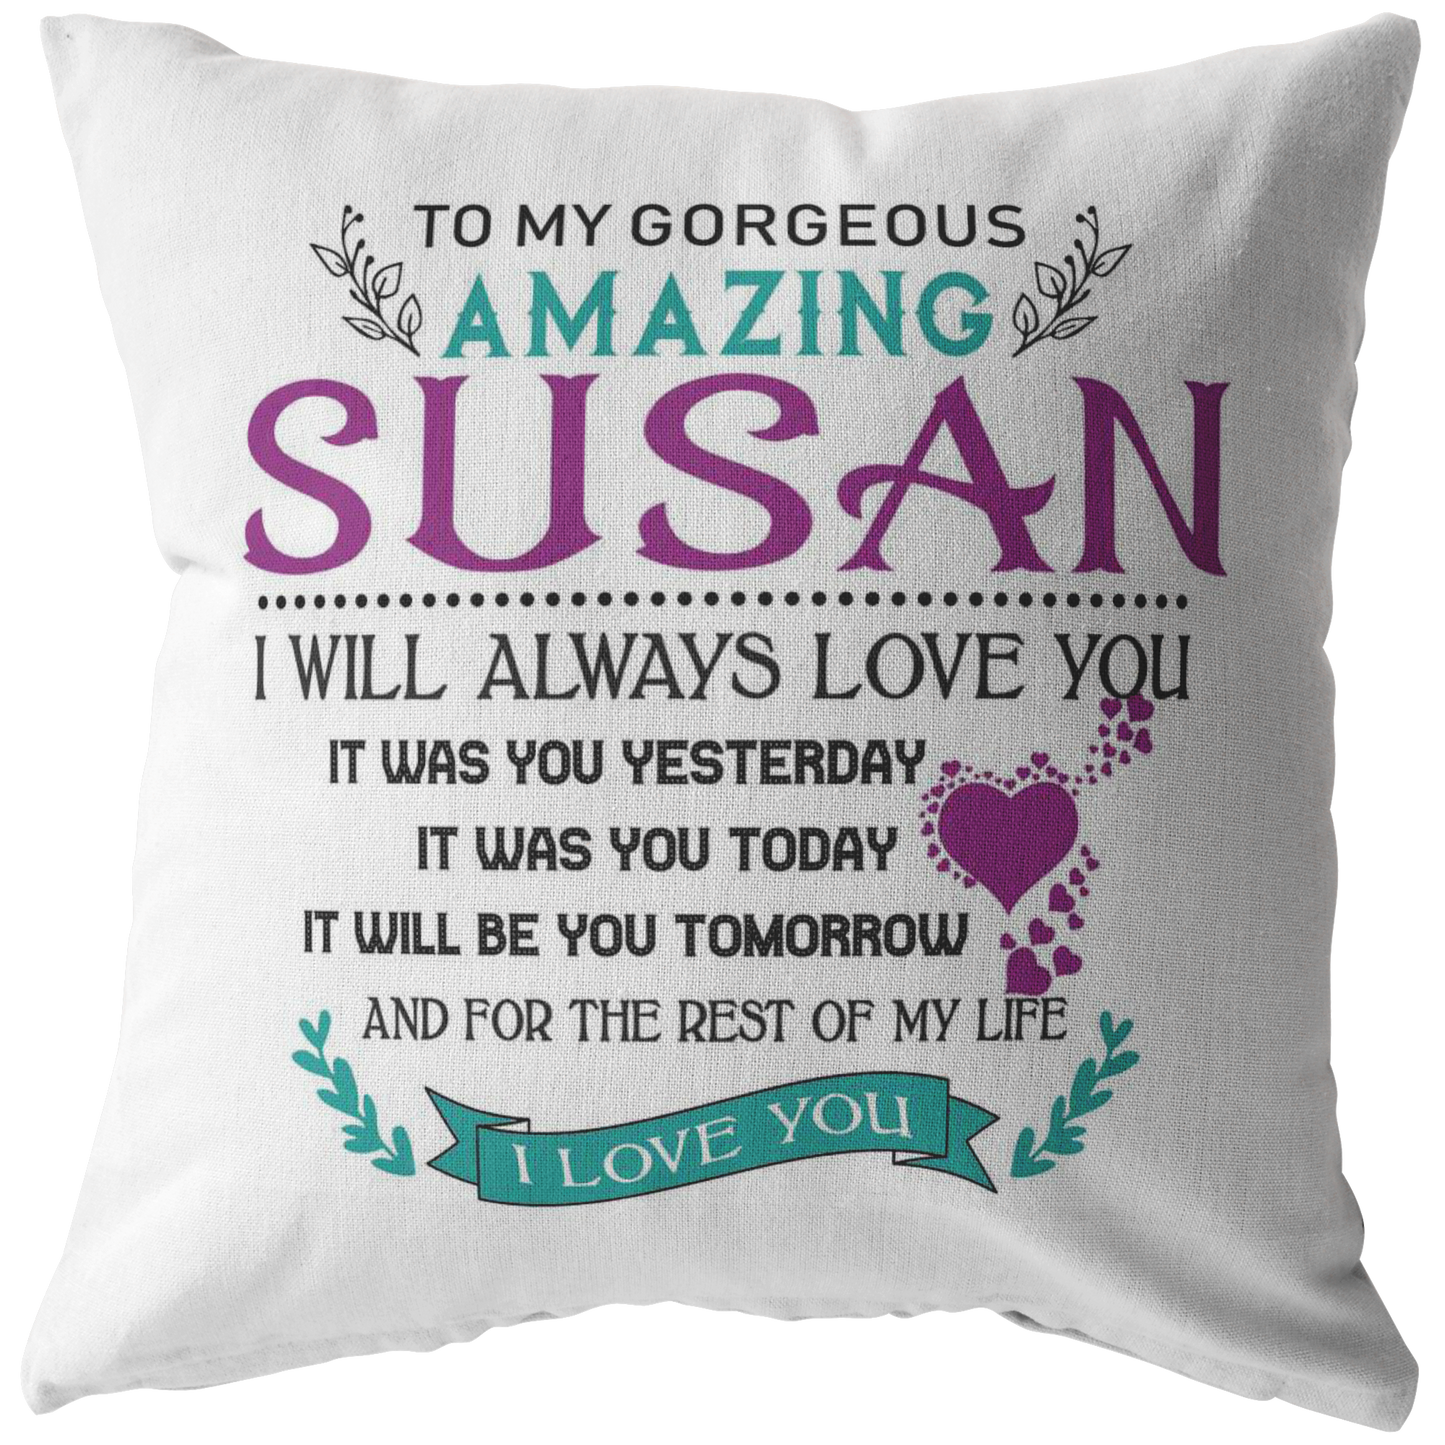 P-20414617-sp-16222 - FamilyGift for Her - to My Gorgeus Amazing Susan I Will Alwa